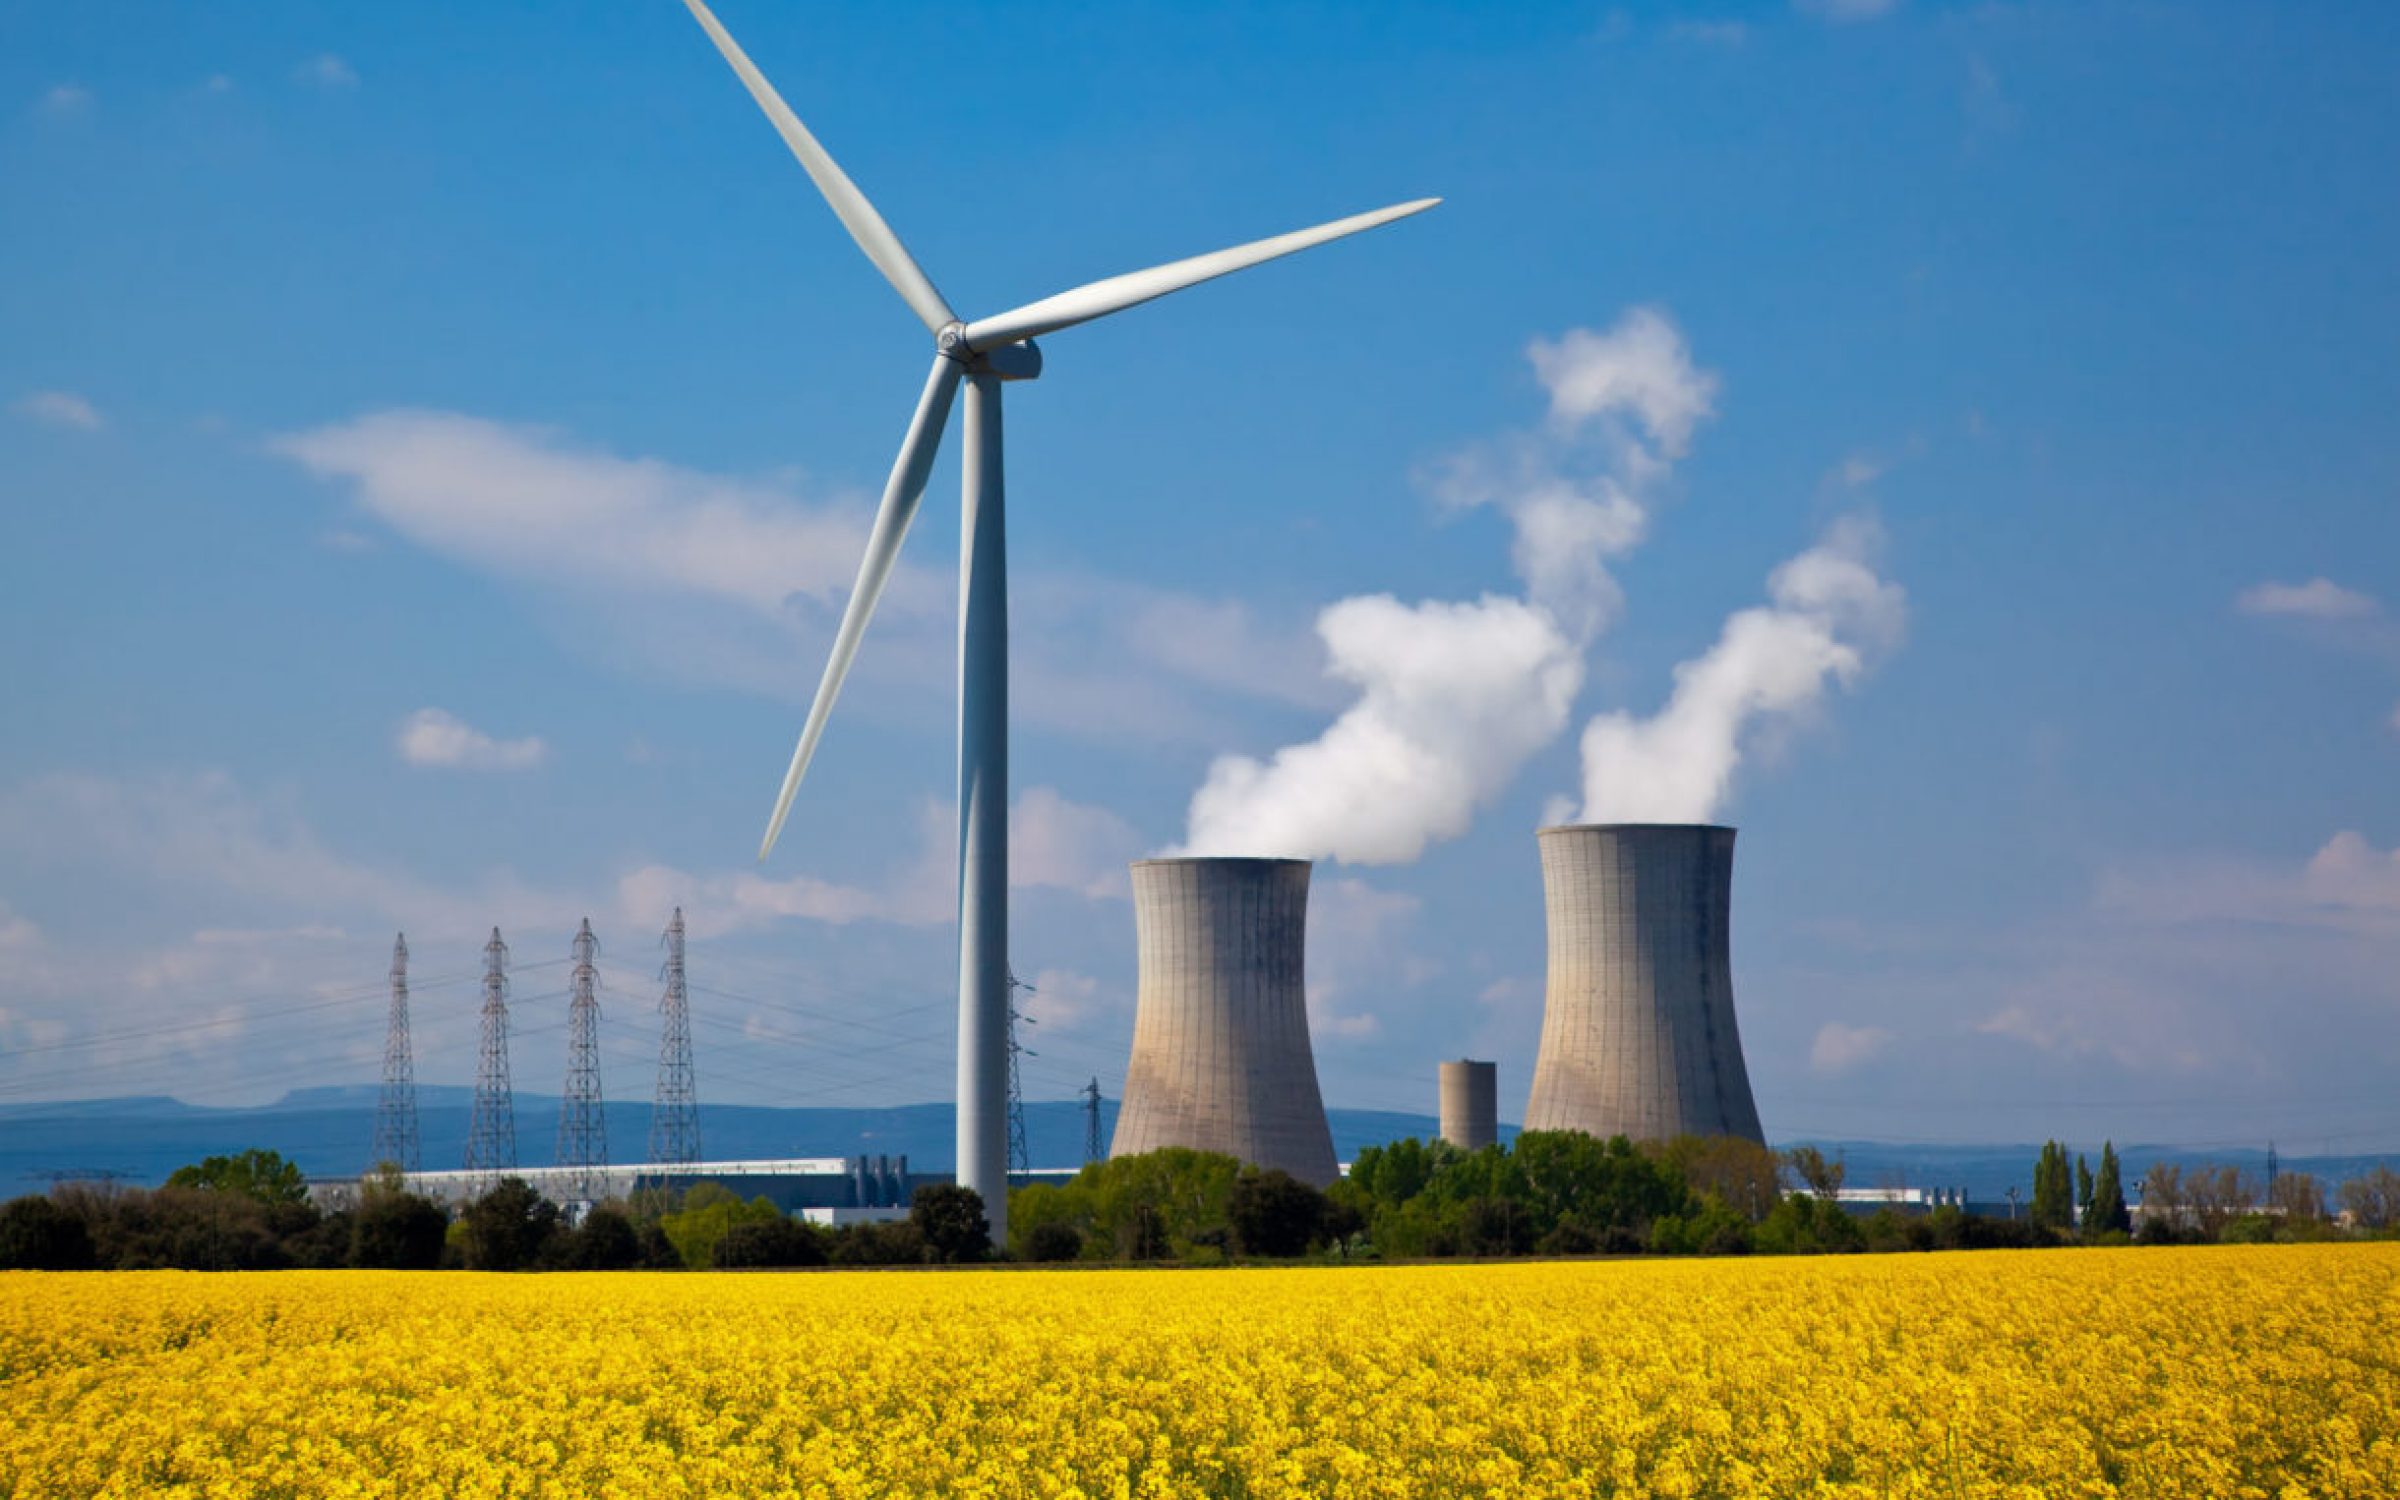 France, Drome and Vaucluse, wind turbines and Tricastin Nuclear Power Station - energy policy